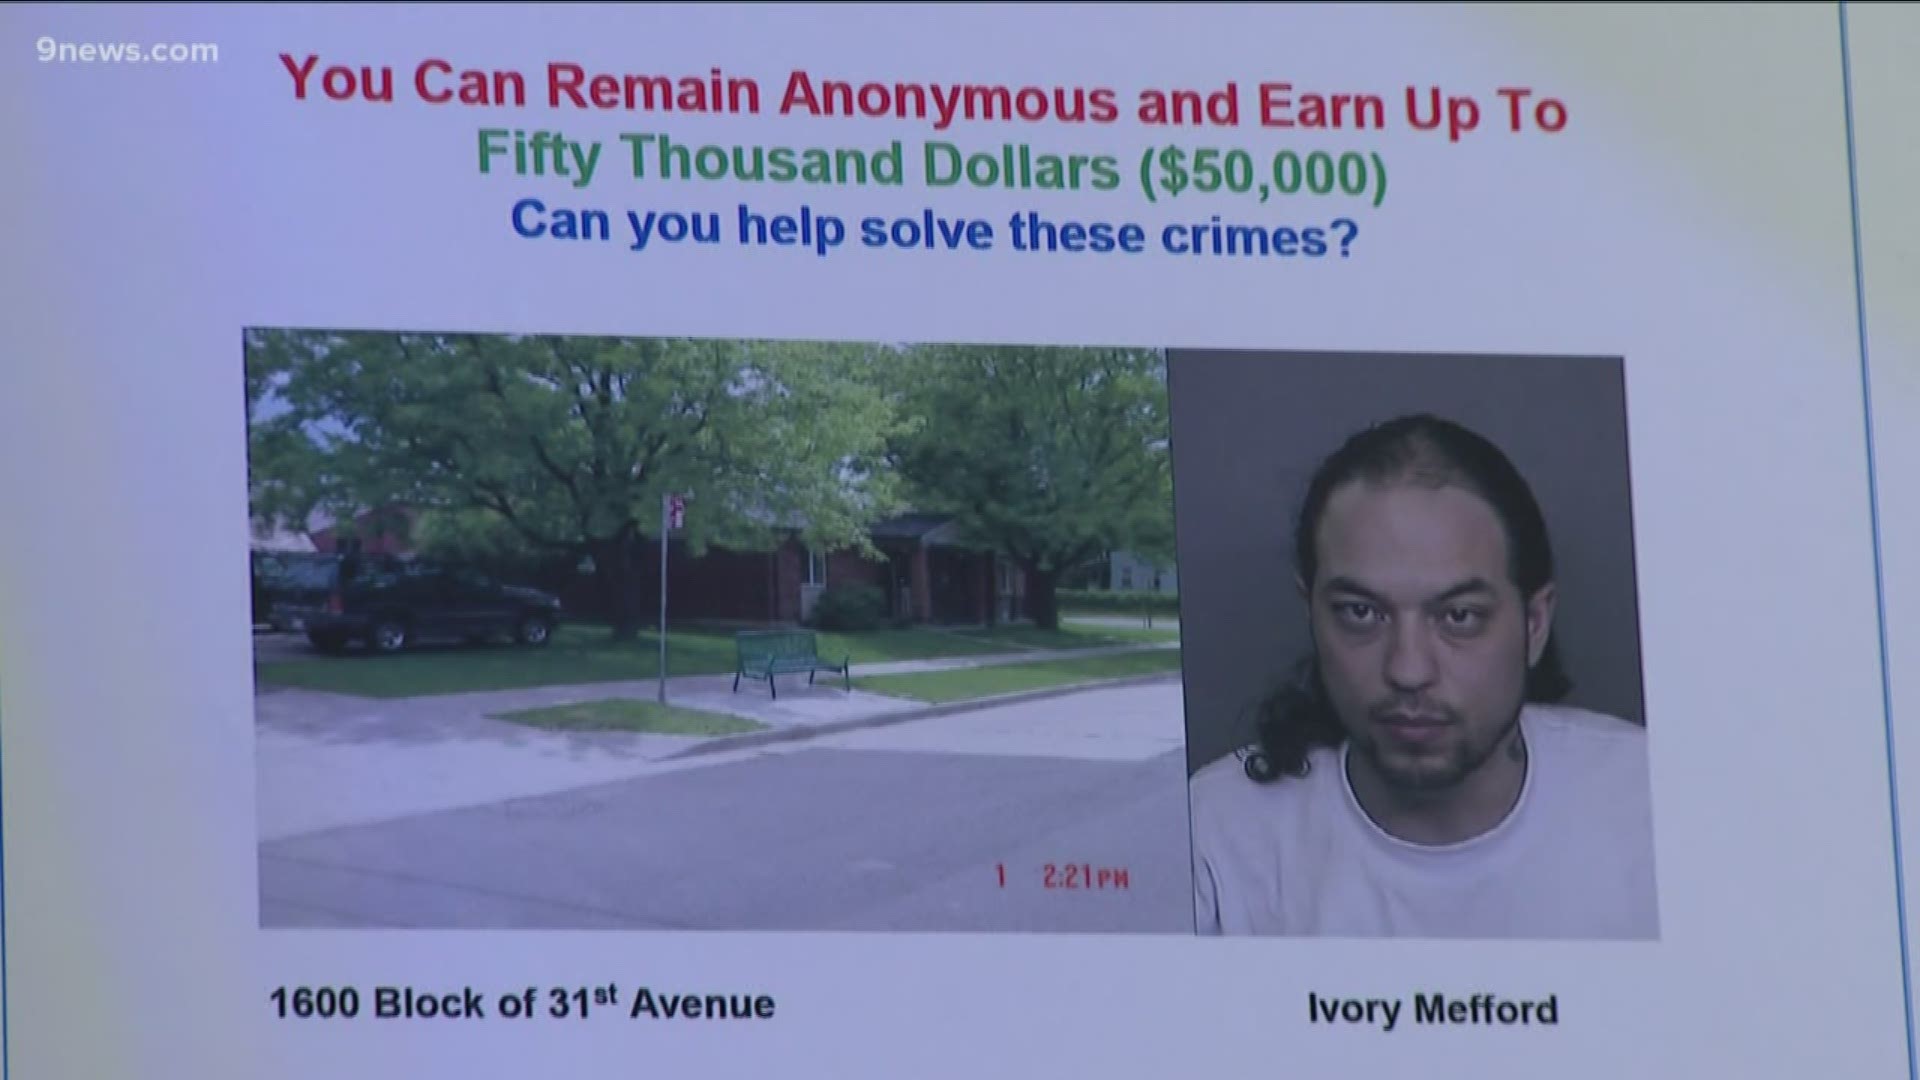 Ivory Mefford was 28 when he was shot and killed in 2009 on East 31st Avenue in Denver's Whittier neighborhood.